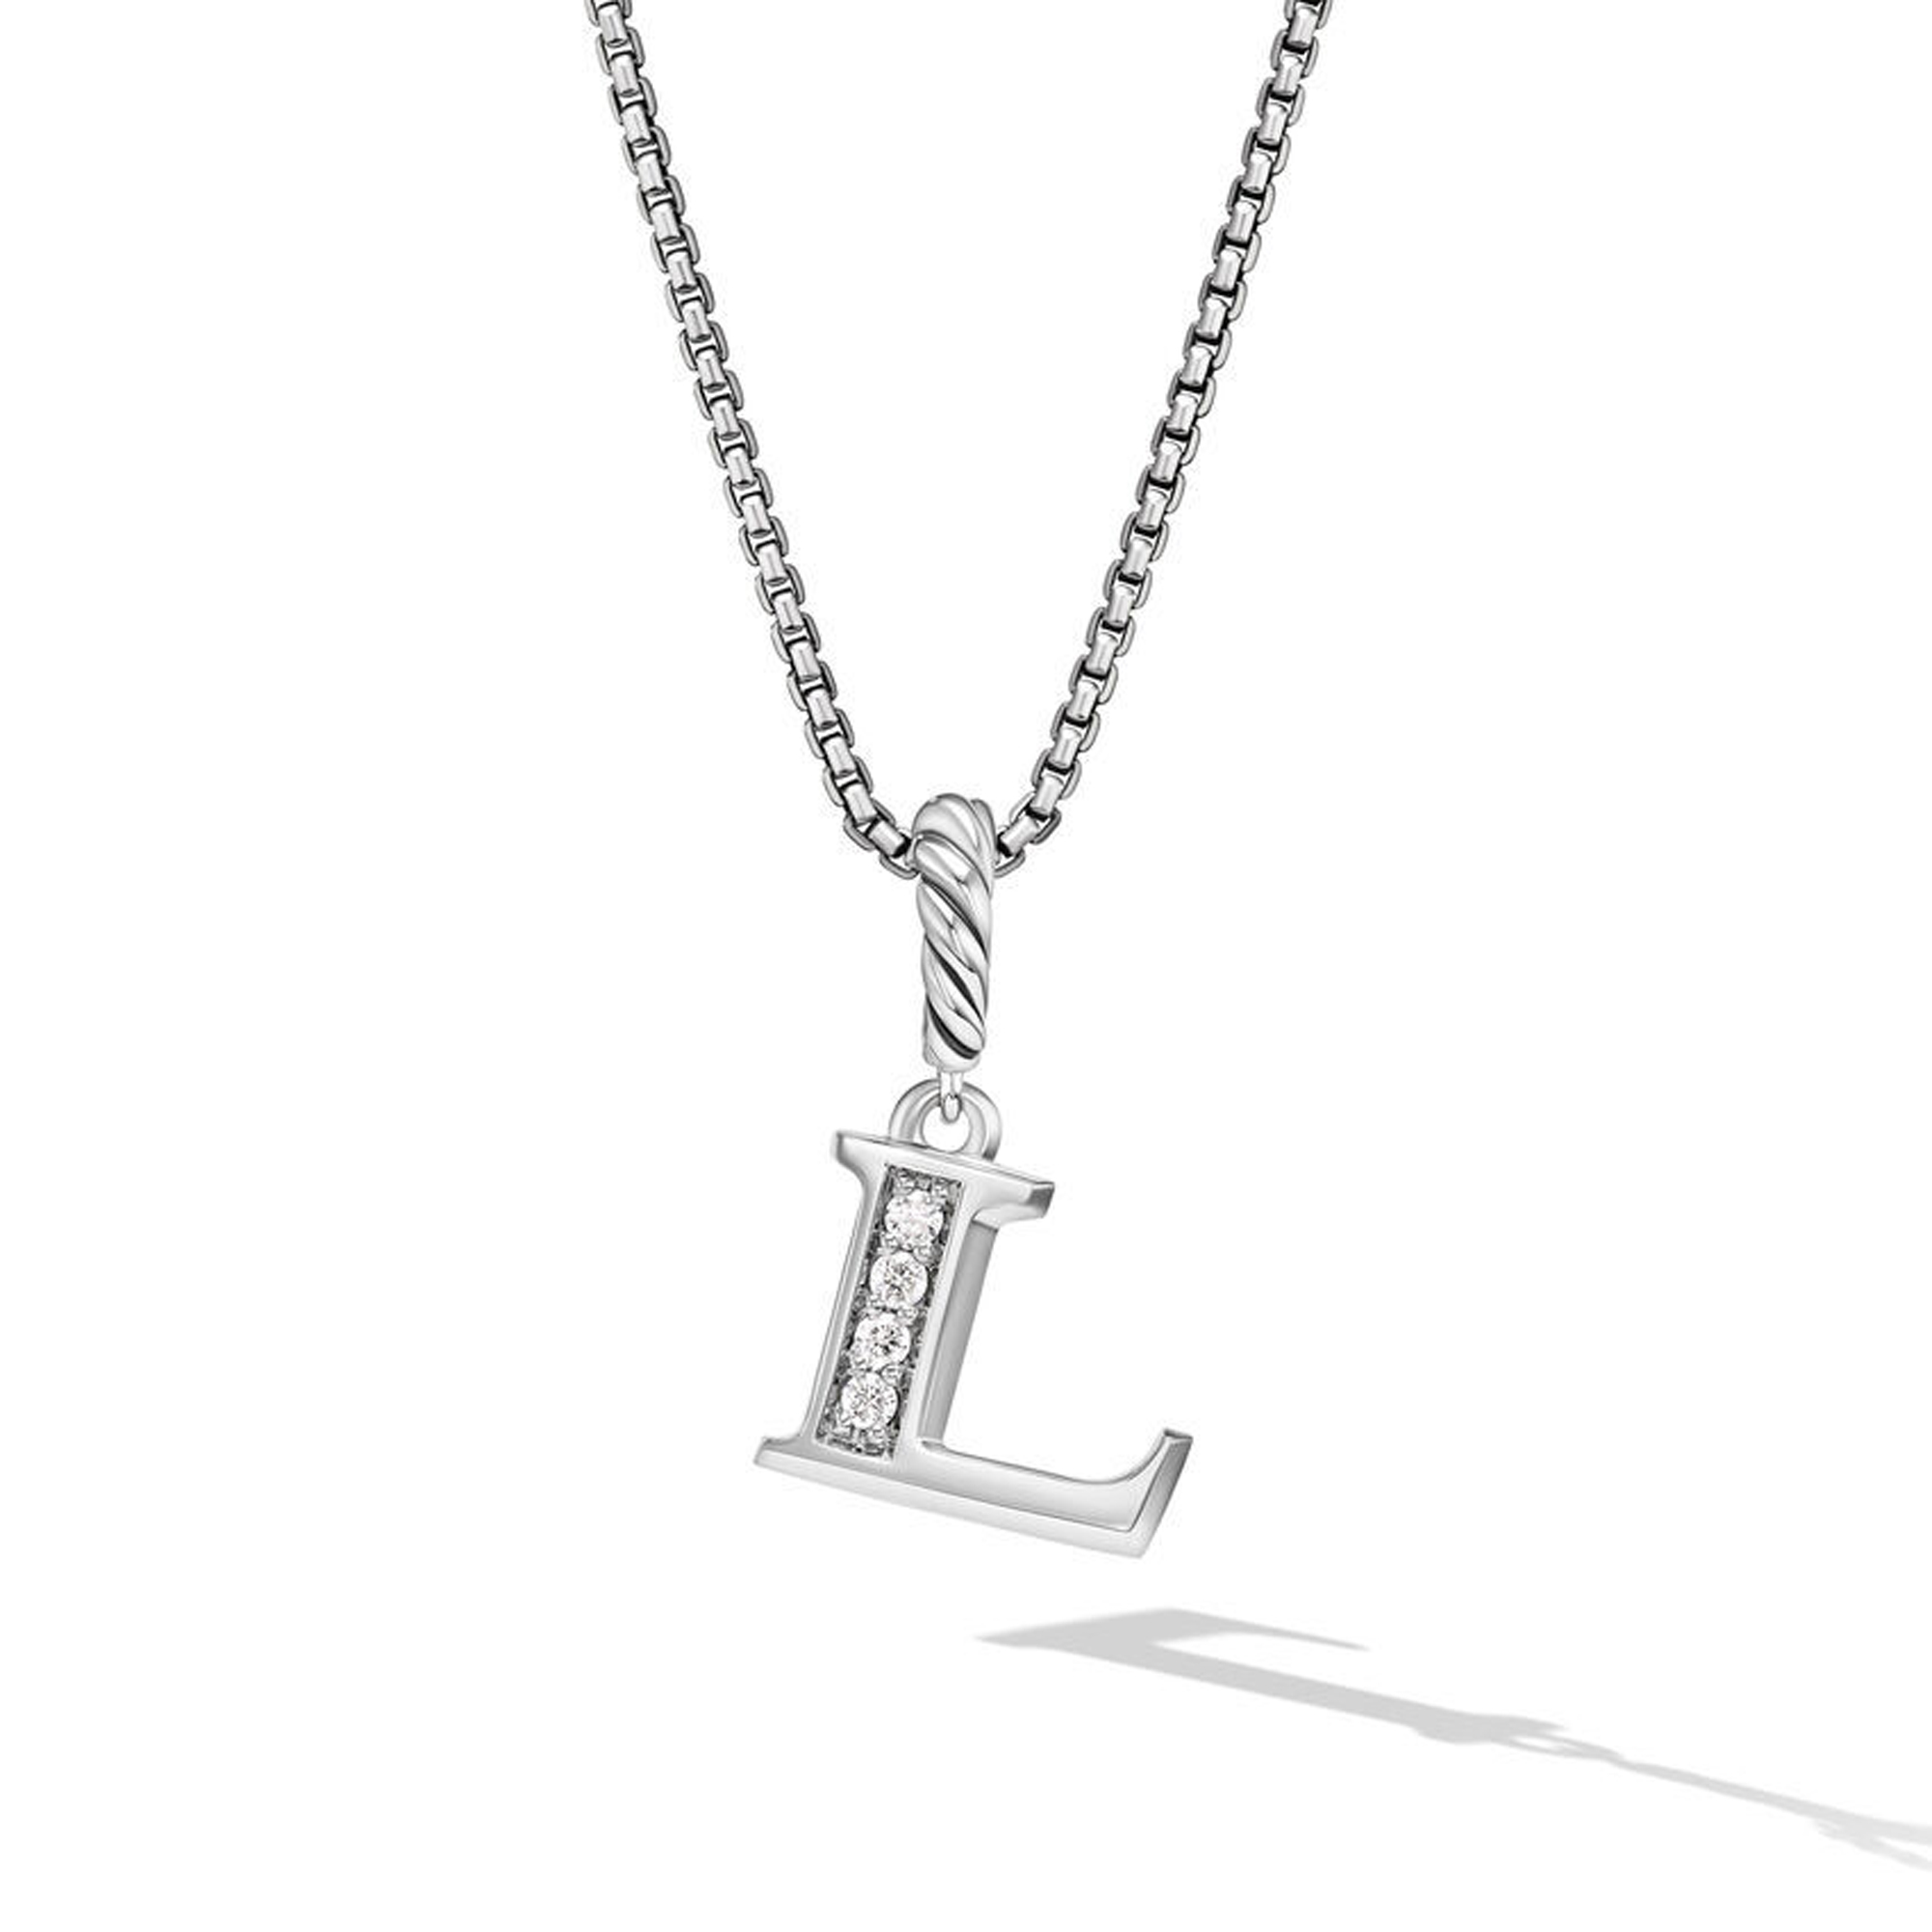 David Yurman Pave Initial Pendant Necklace in Sterling Silver with Diamond L